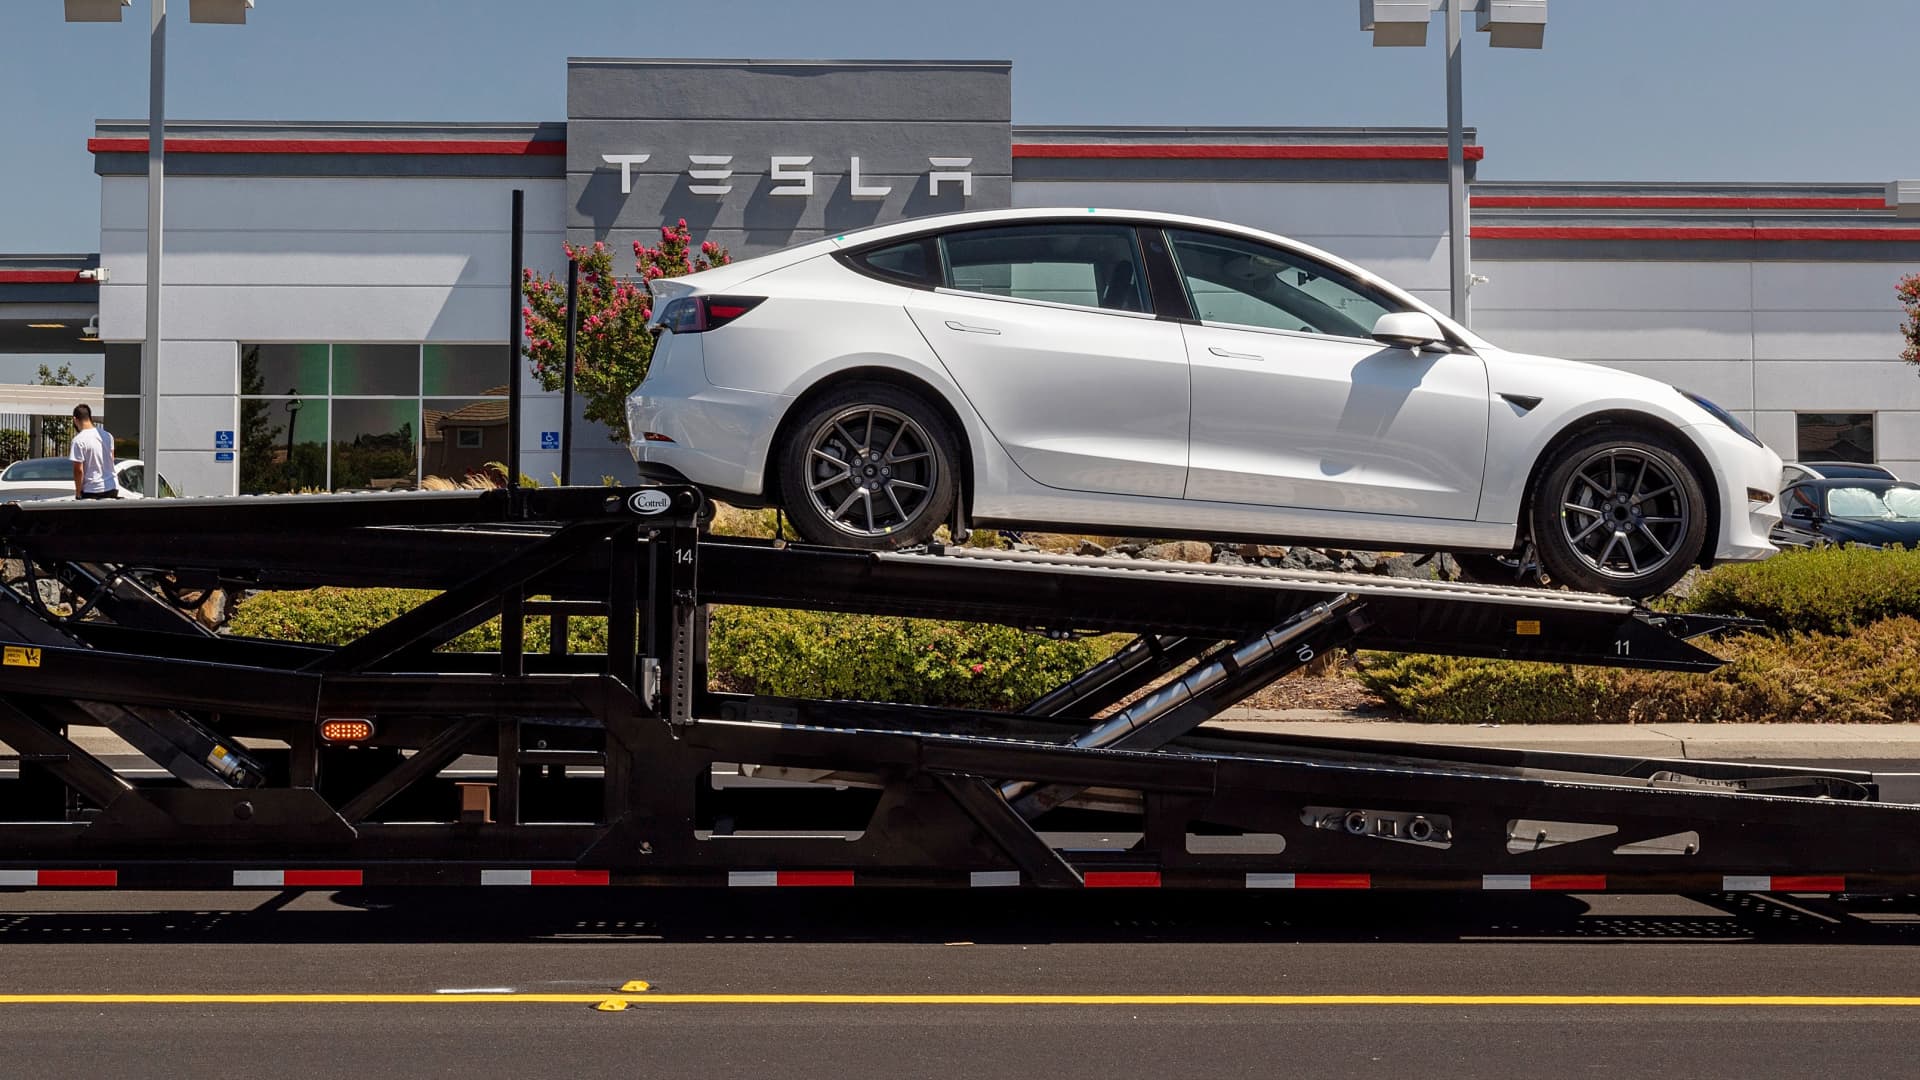 Tesla shares close down 5% after price cuts, Model 3 refresh